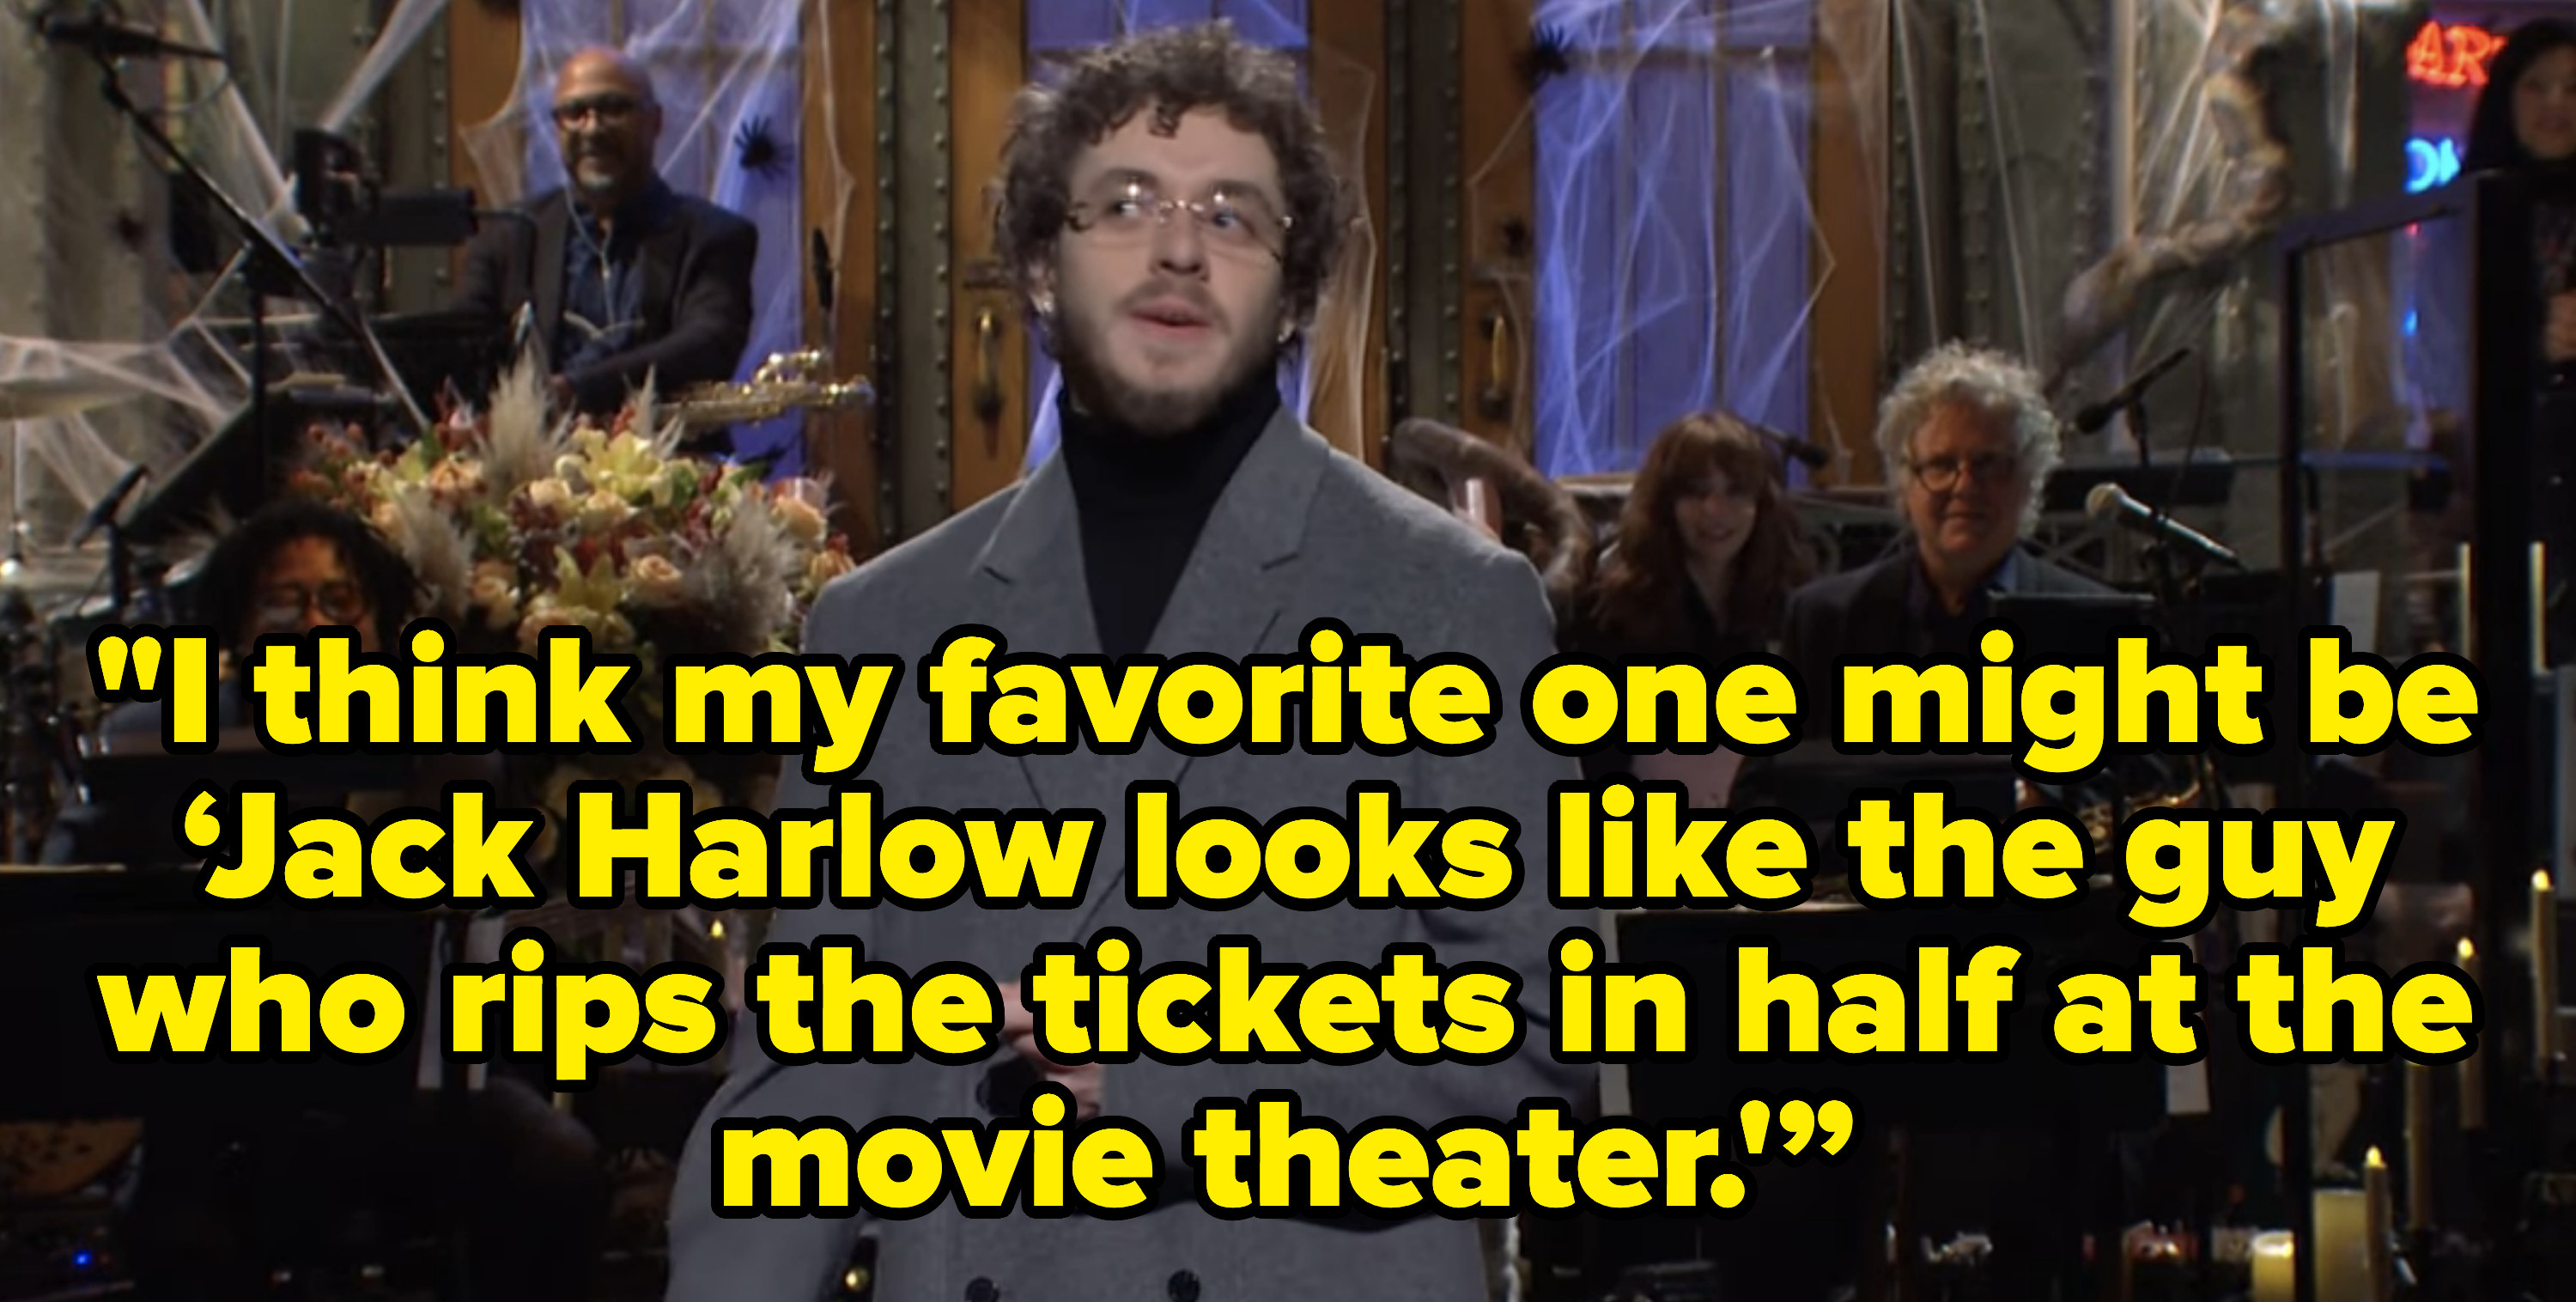 &quot;I think my favorite one might be &#x27;Jack Harlow looks like the guy who rips the tickets in half at the movie theater.&#x27;”